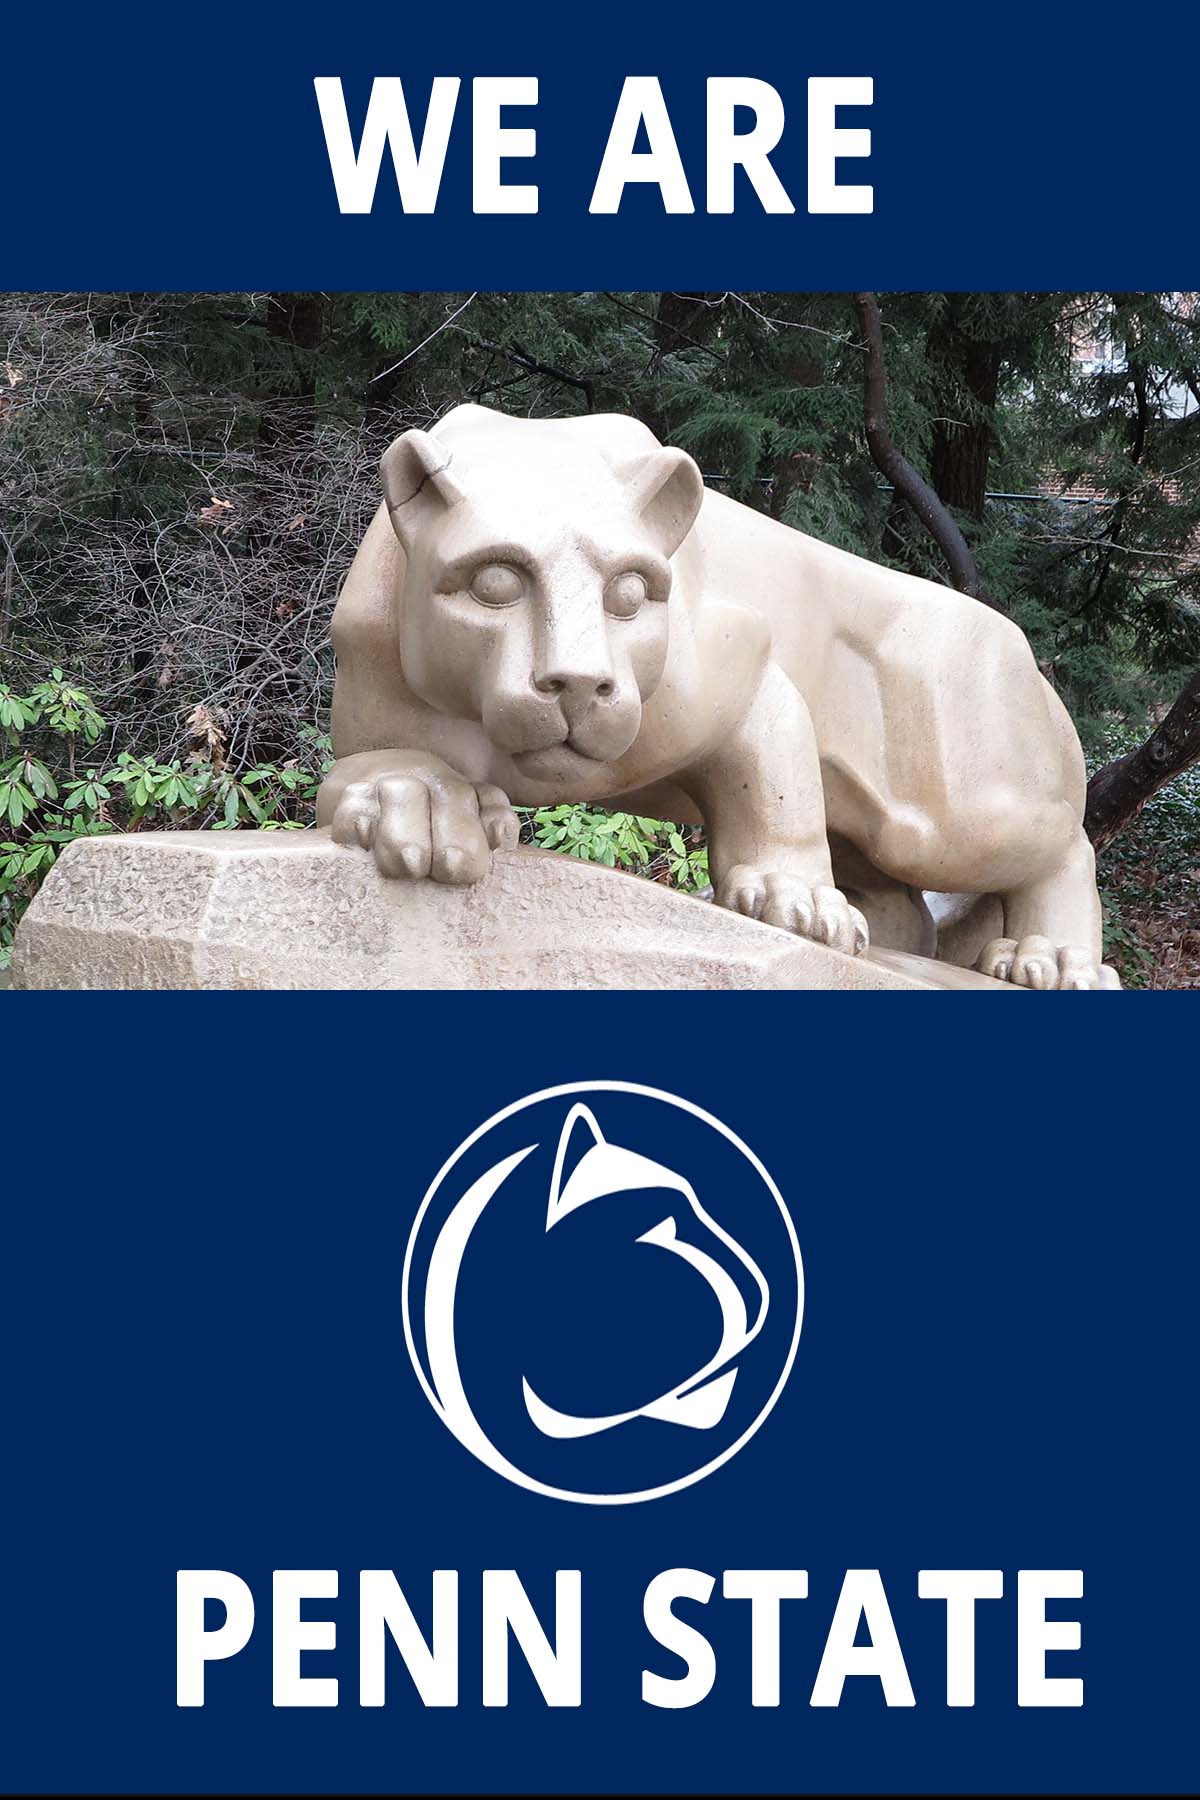 We are Penn State on Pinterest